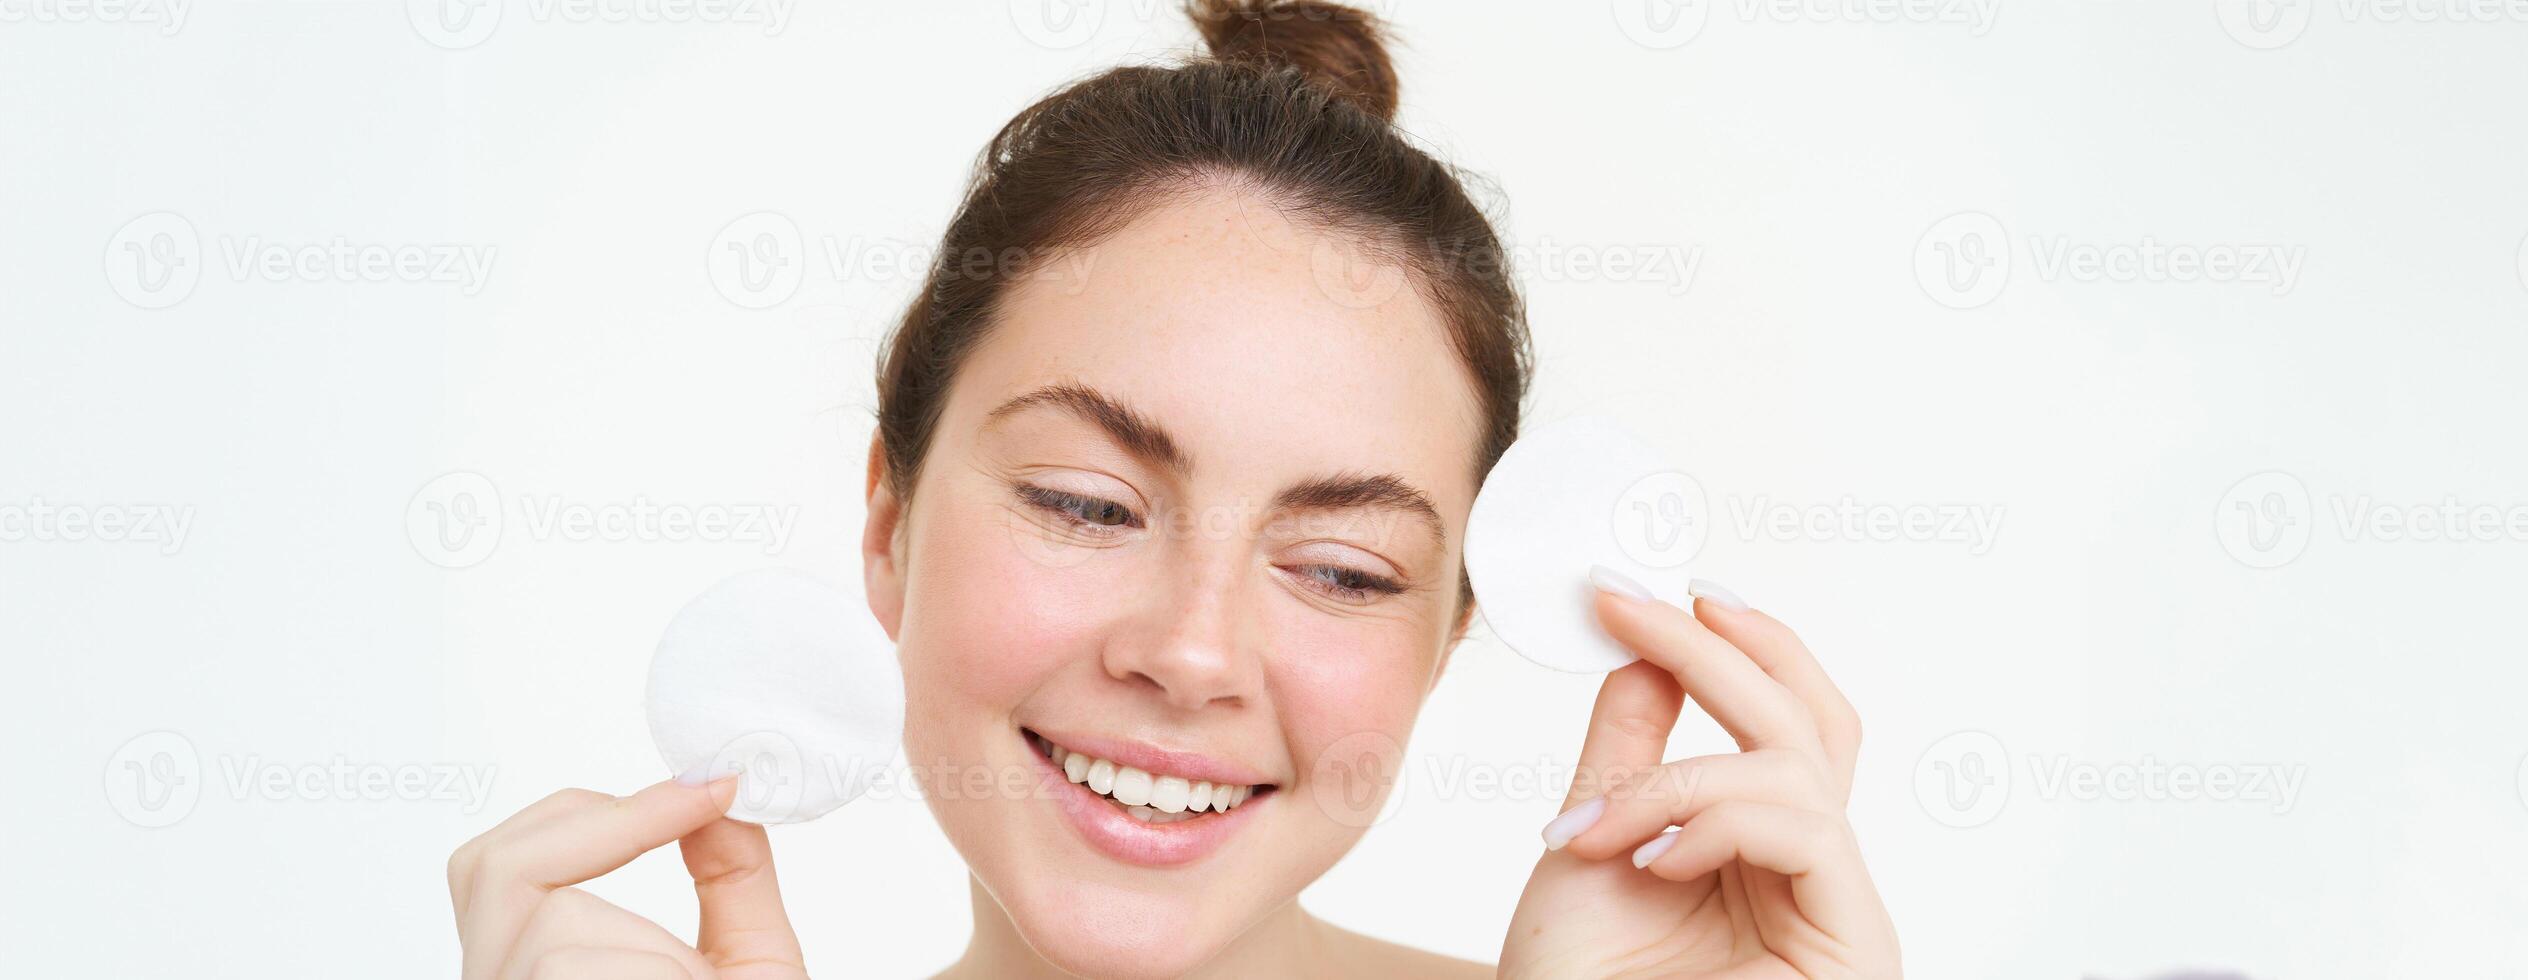 Beauty woman with clear glowing face, showing cotton cosmetic pads for makeup removal, cleansing her facial skin, standing over white background photo